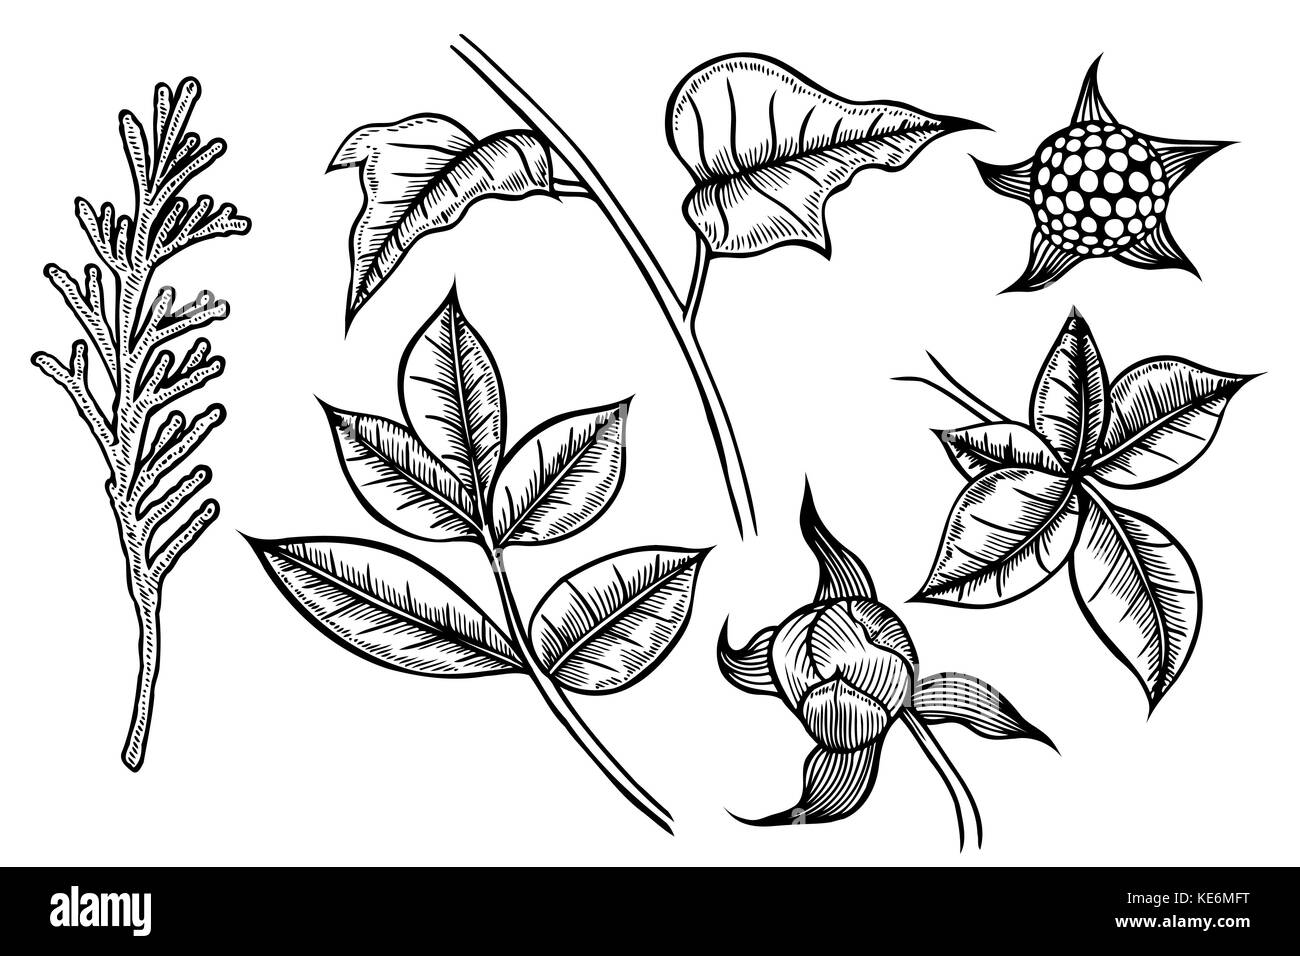 set of plants painted by hand, a branch of spruce or tuja, leafy branches and flowers Stock Vector